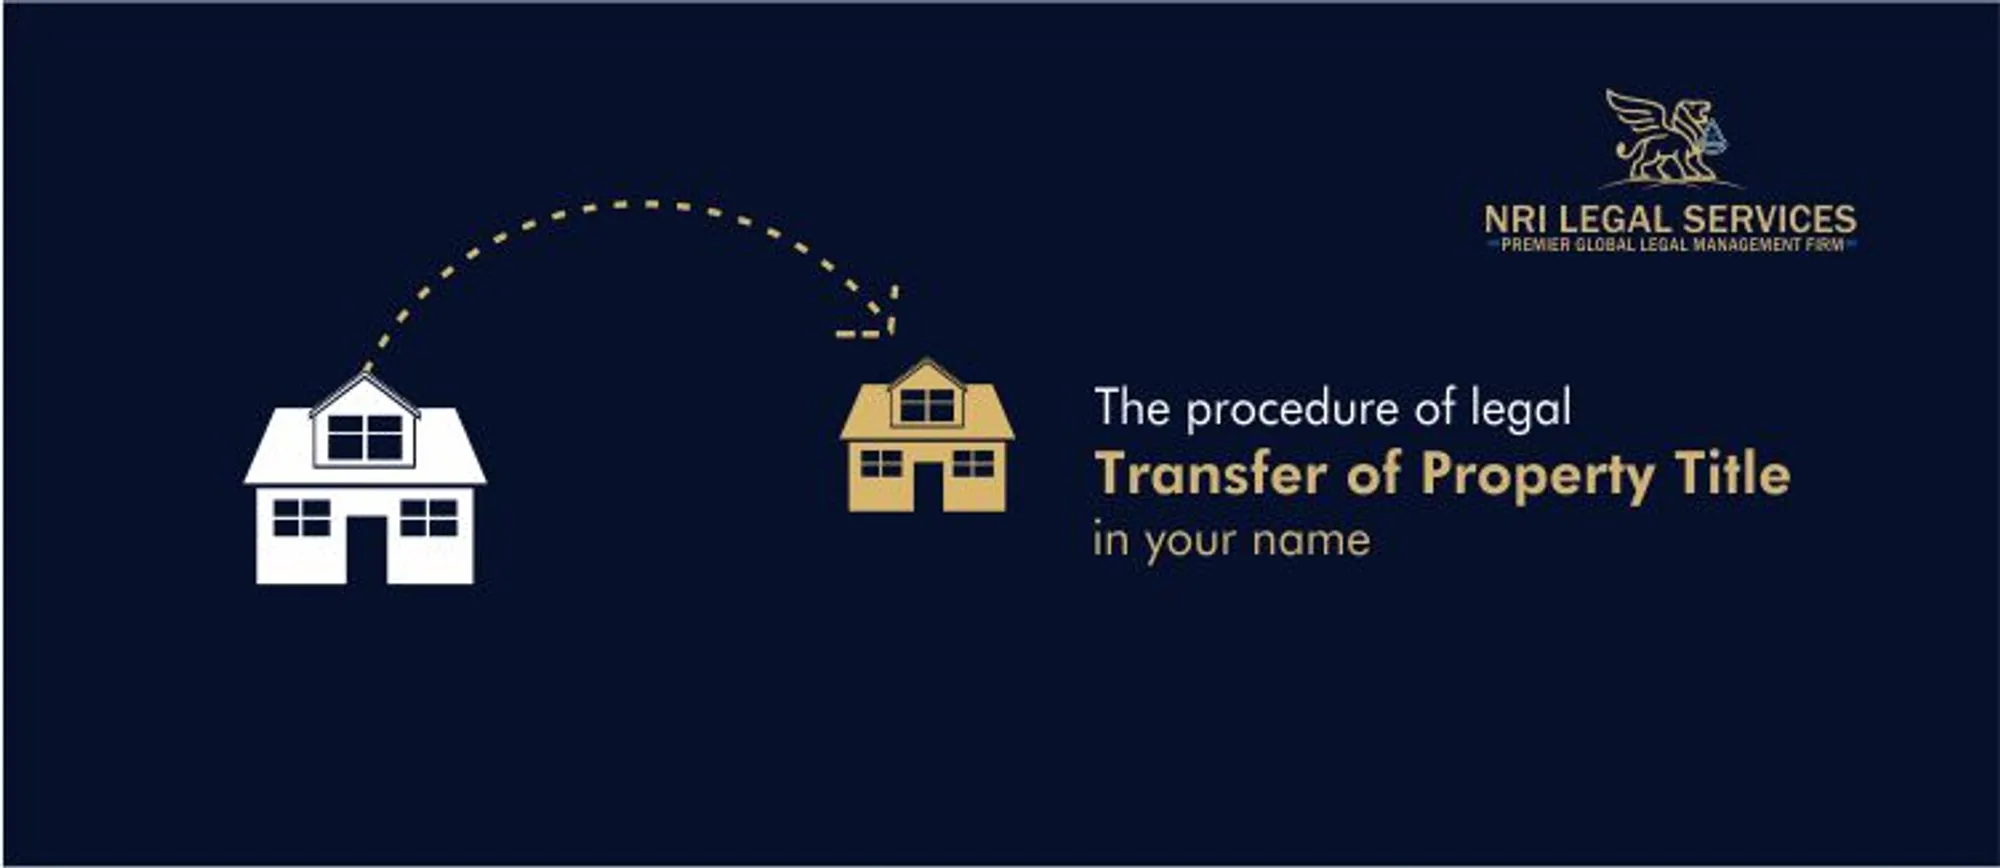 The procedure of legal transfer of property title in your name